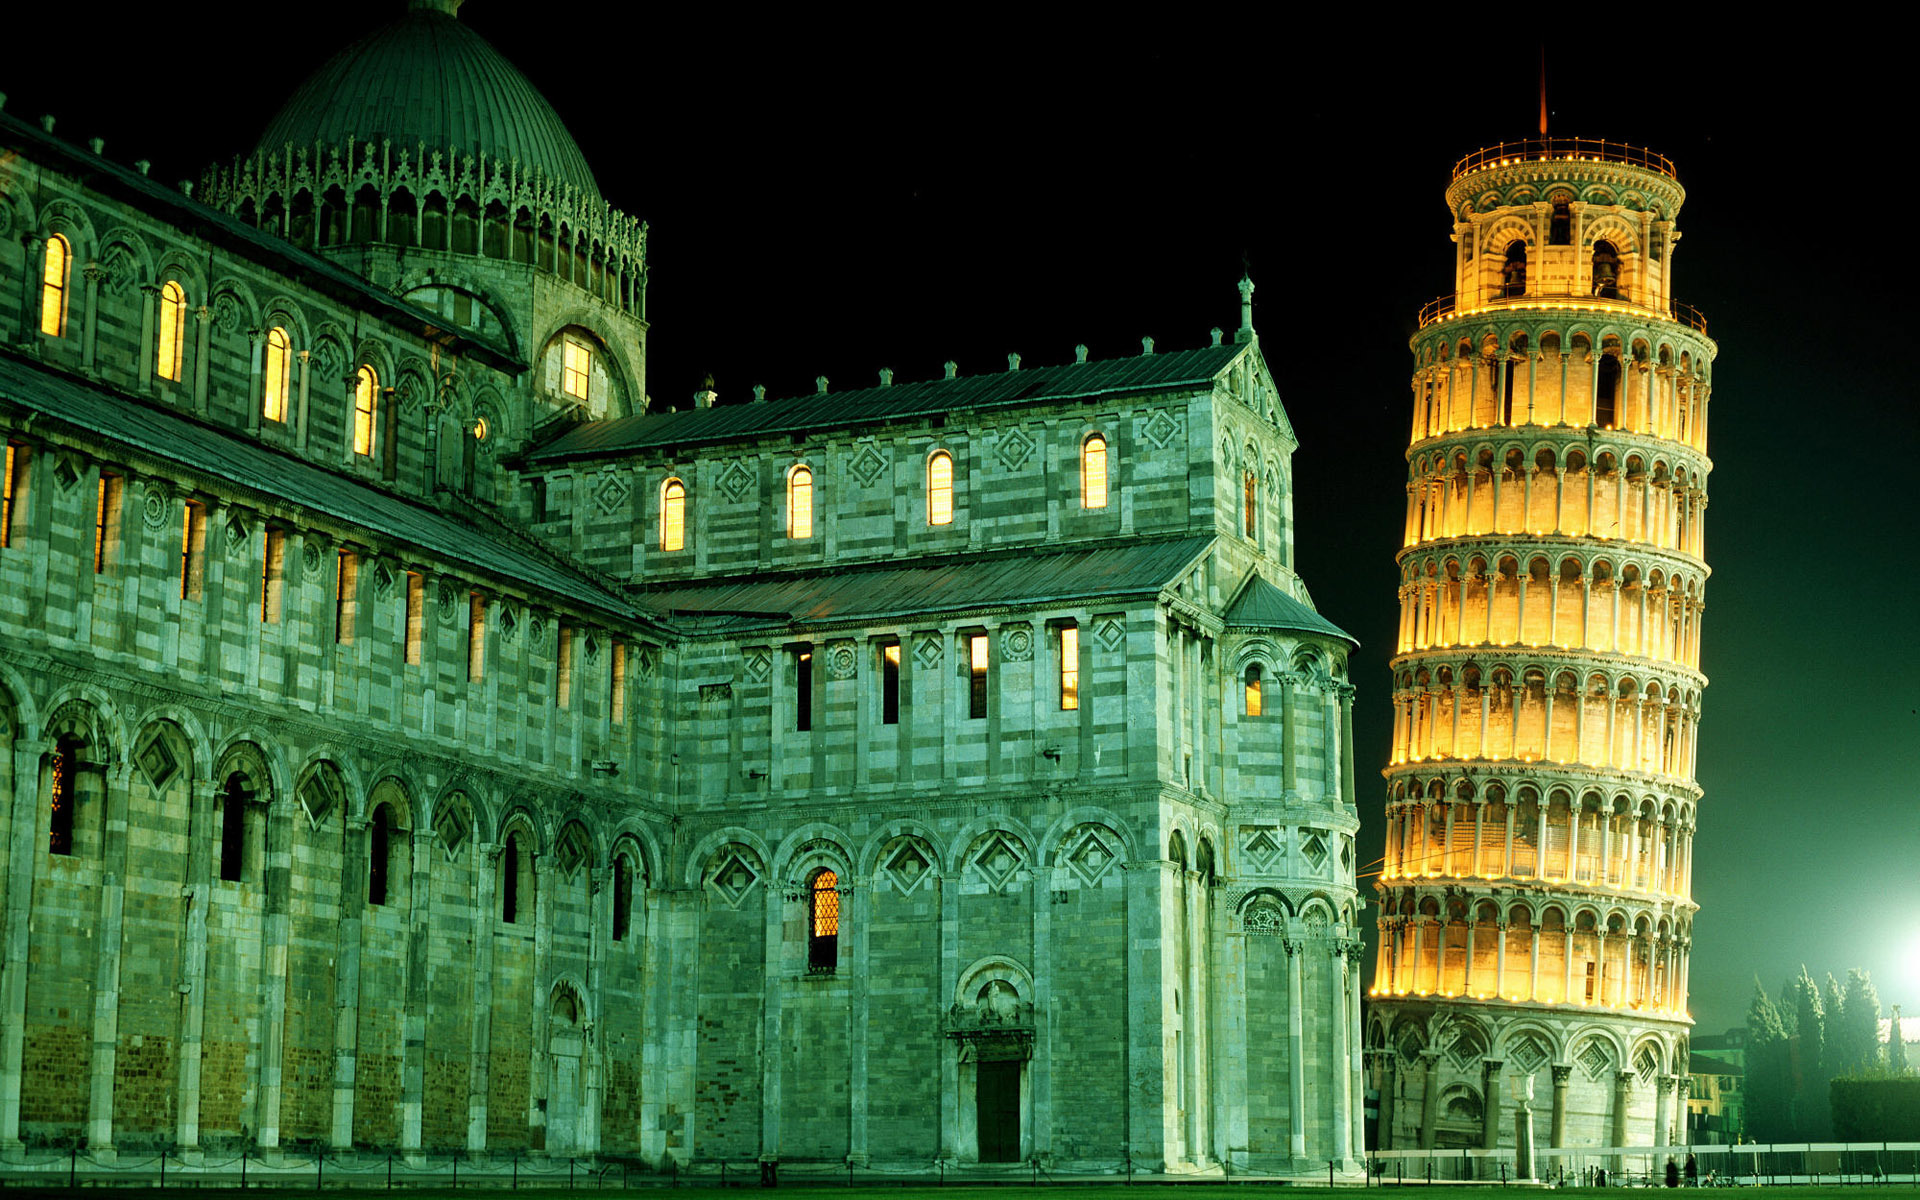 man made, leaning tower of pisa, monuments